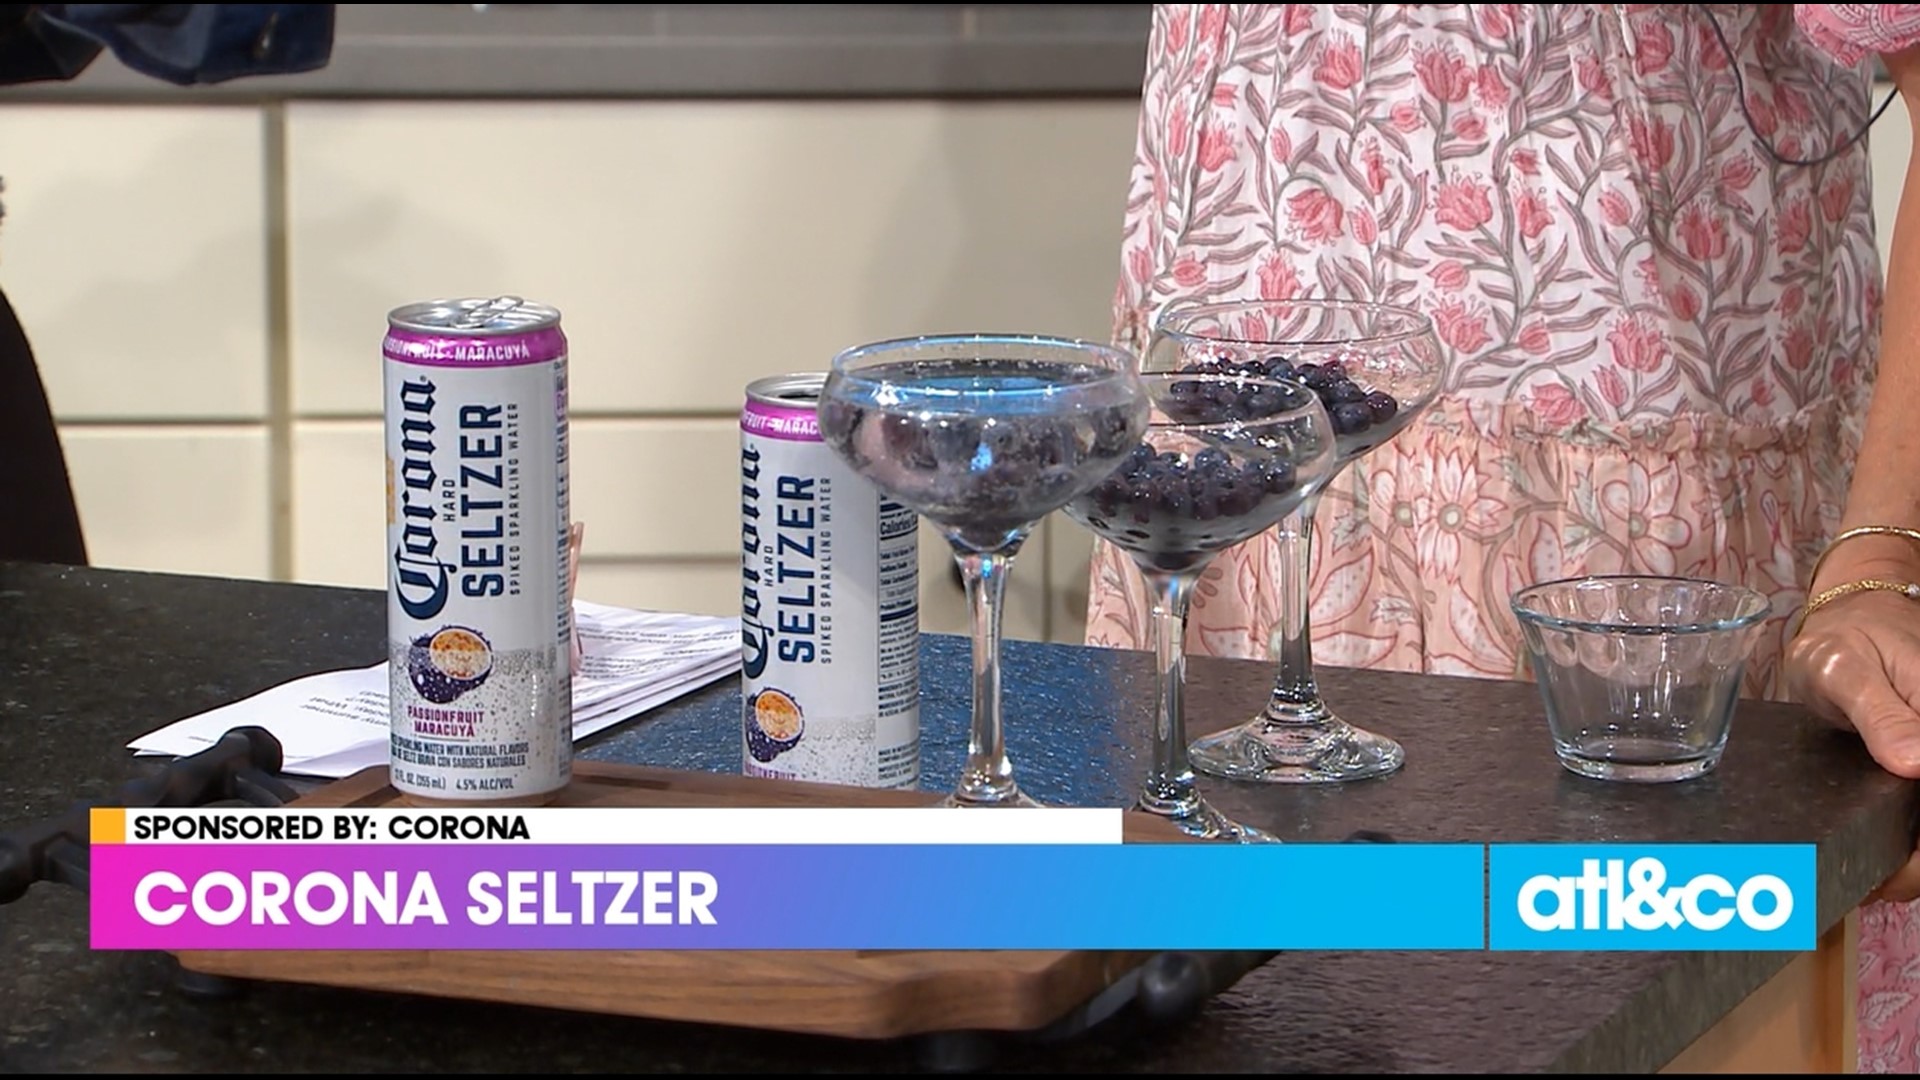 Chef Mali Hunter whips up a summer potato salad and refreshing Corona Seltzer with berries.